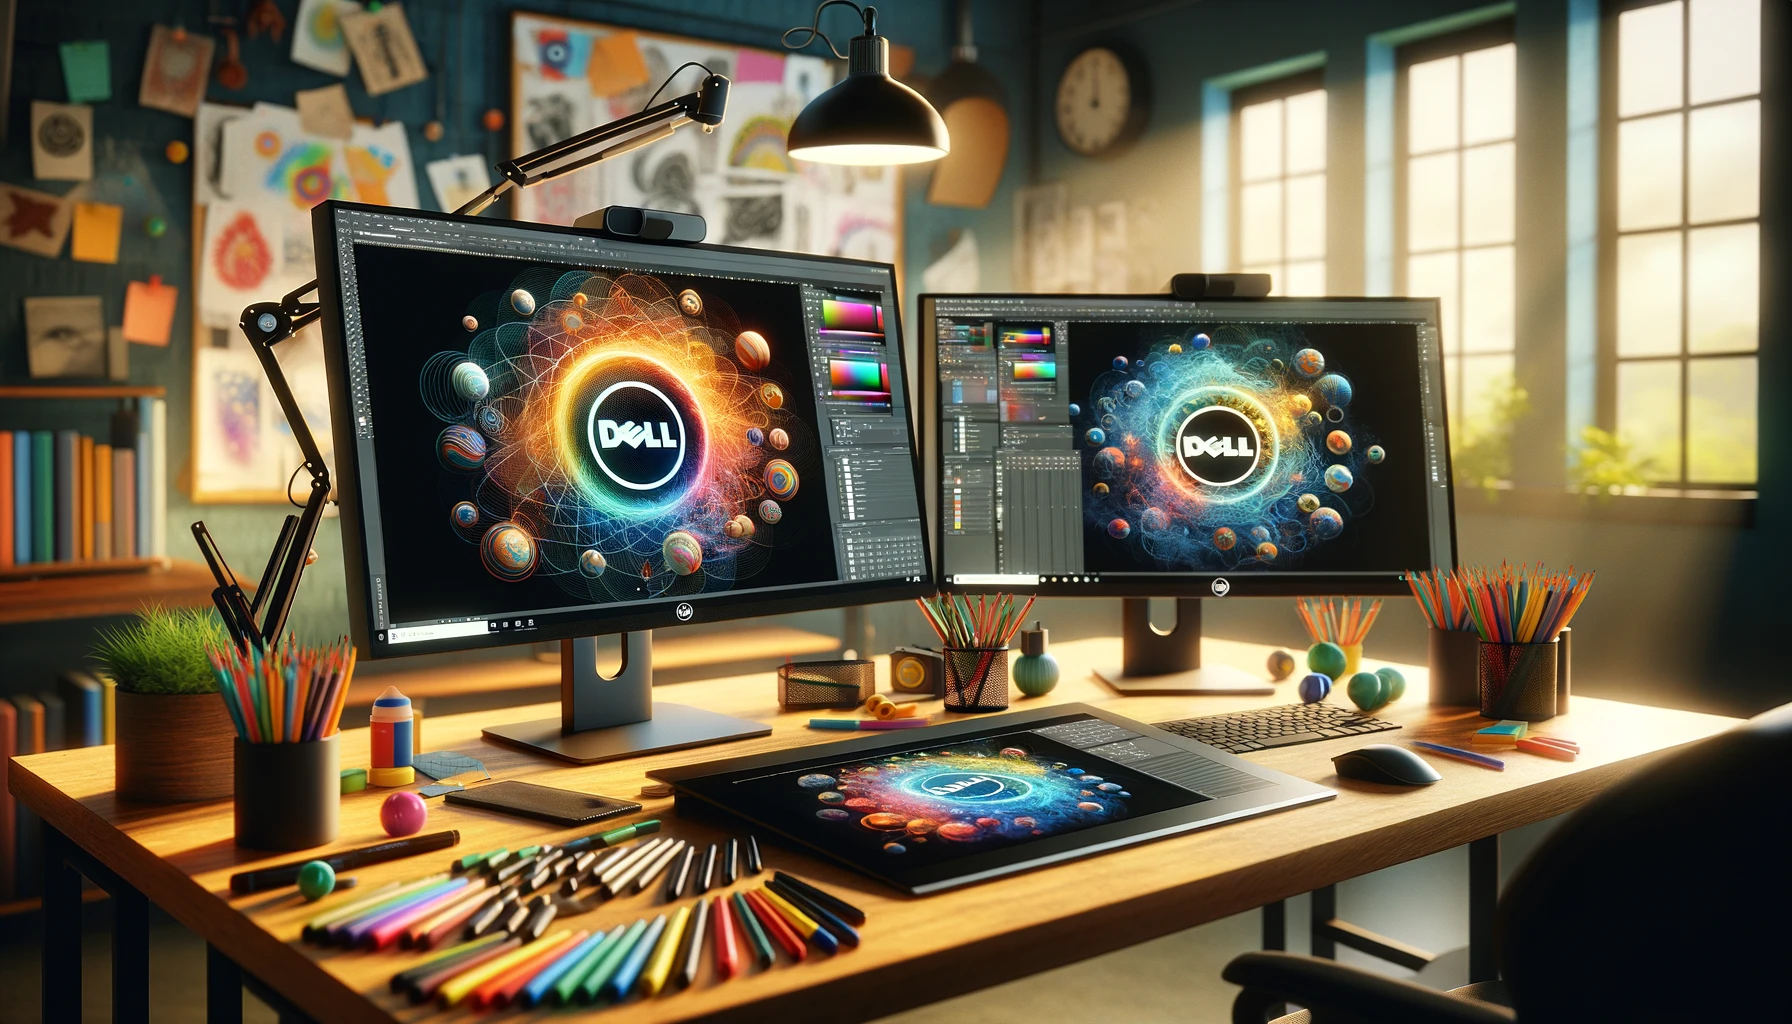 The image above features a 3D stock photo of a Dell computer setup within a creative workspace, highlighted by dual monitors on a Dell Precision workstation and surrounded by various design tools, embodying a vibrant and productive studio atmosphere. dell-computer-repair-ny-ny